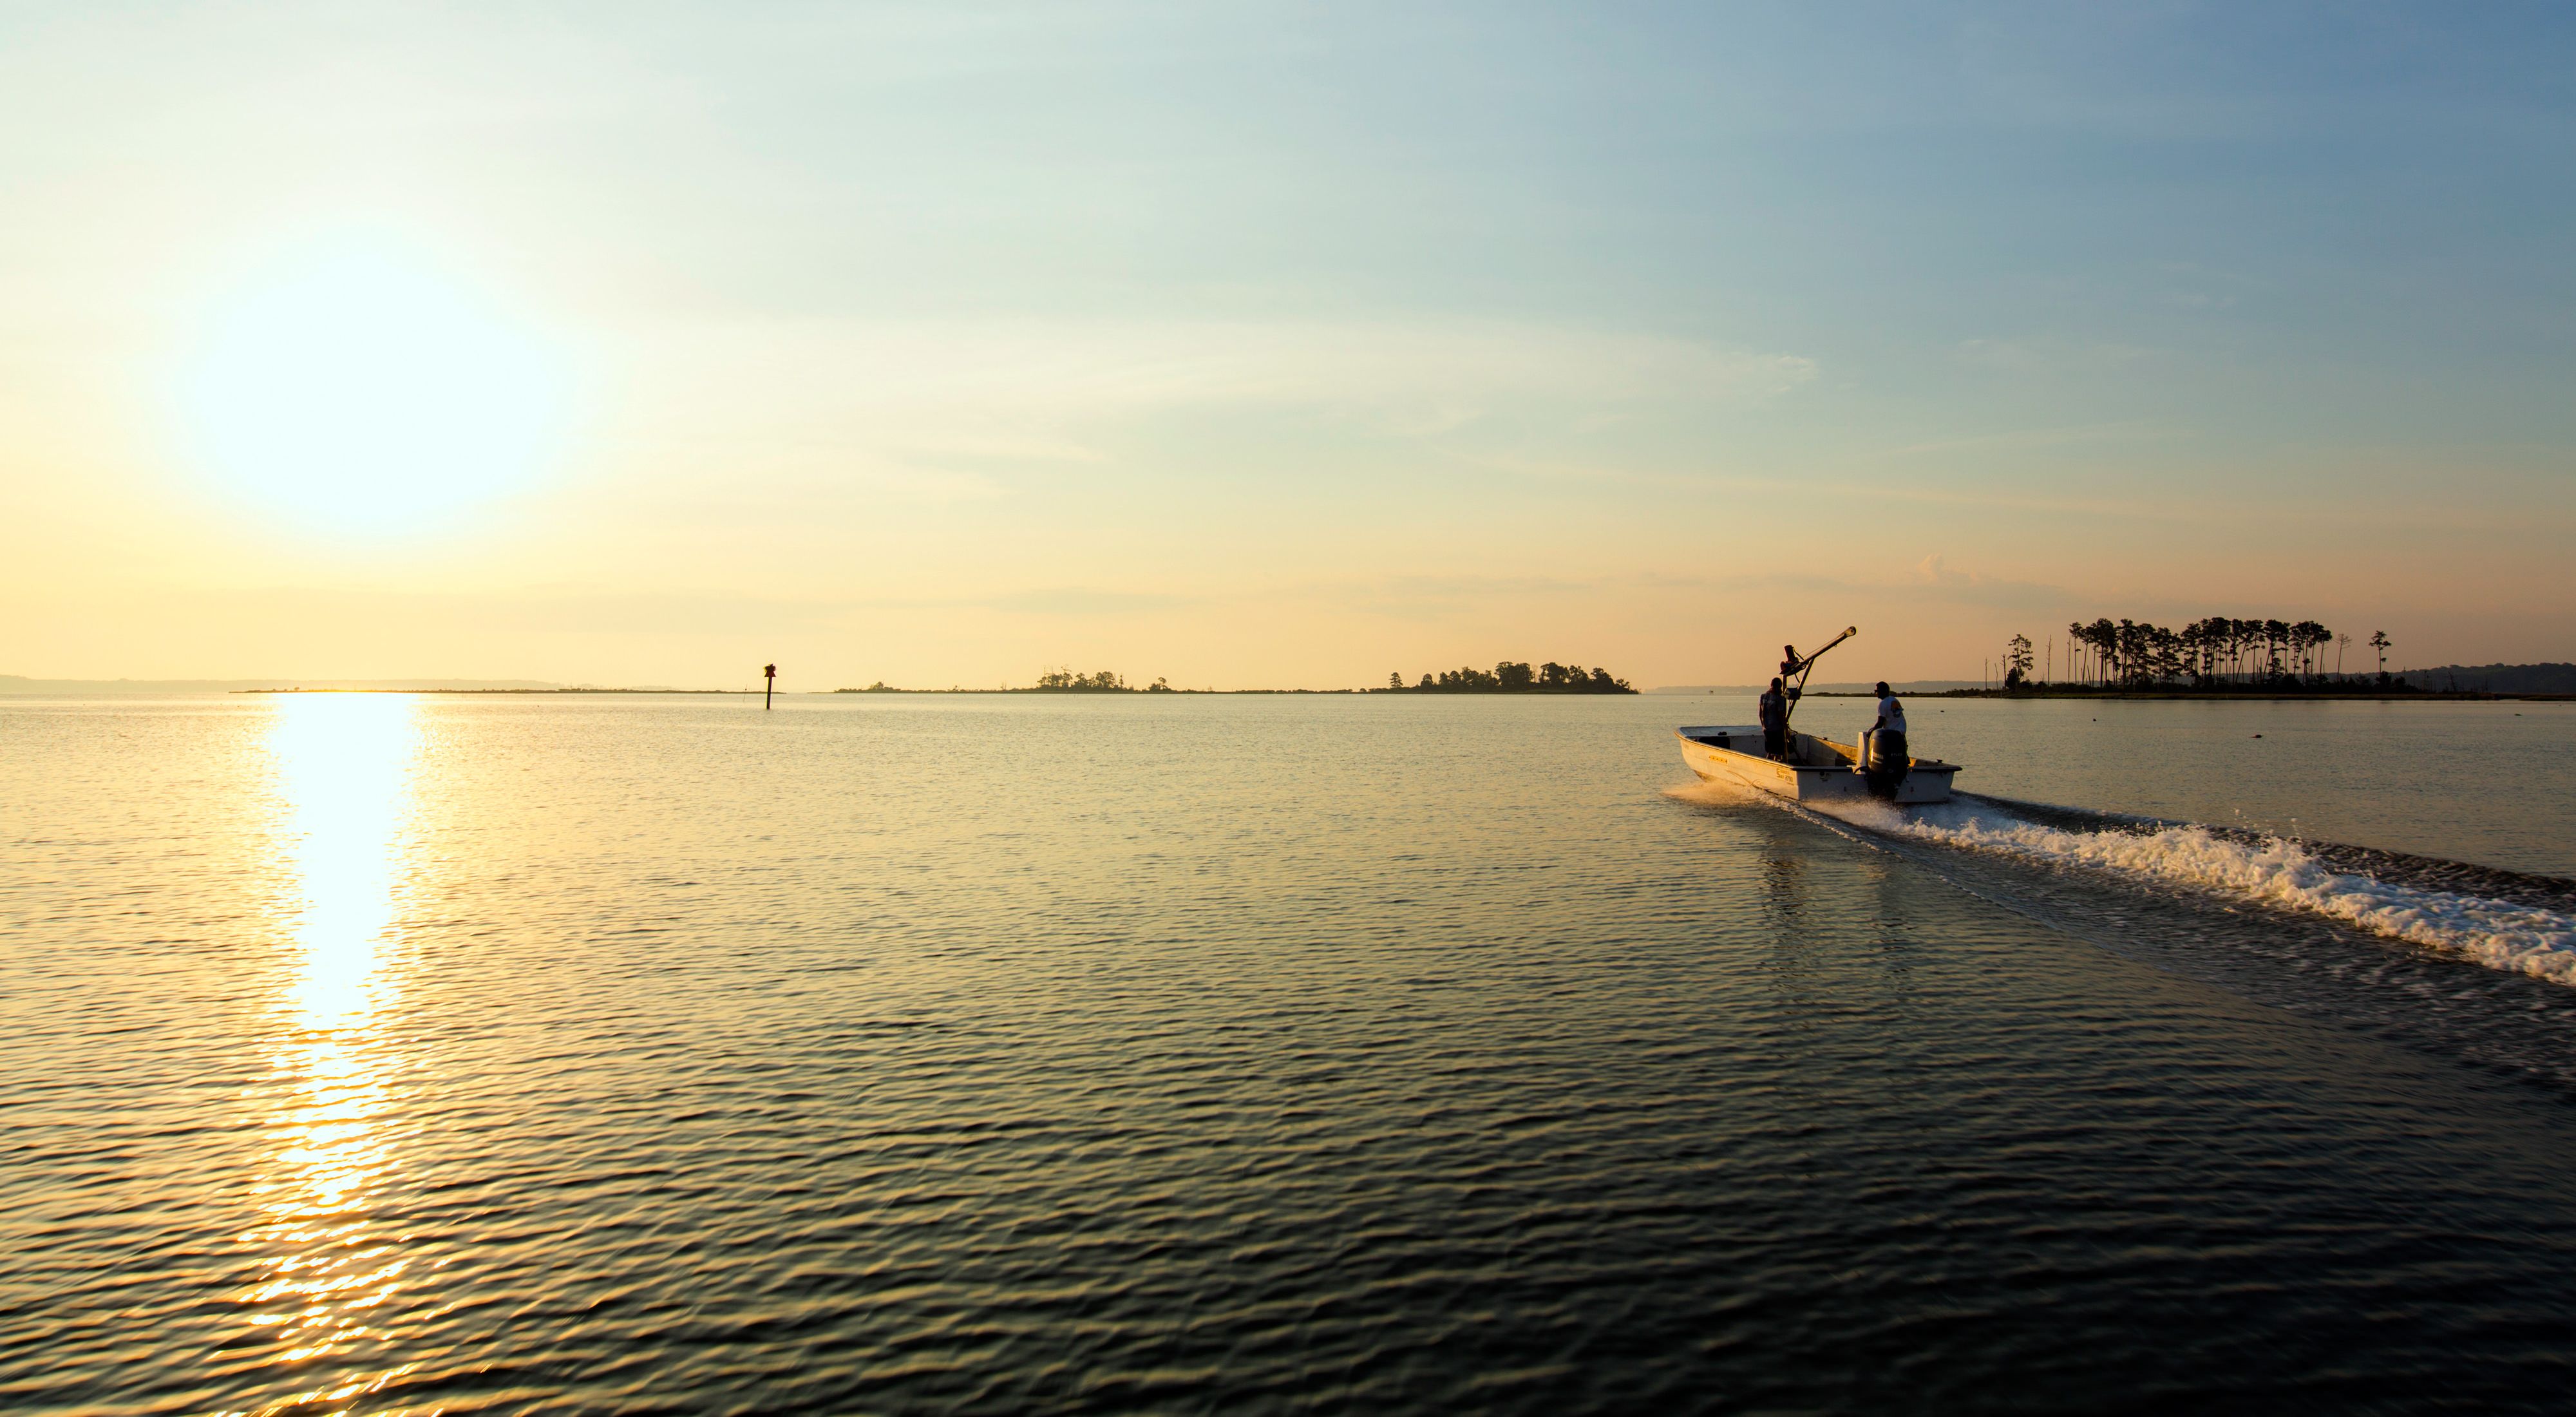 Two men in a flat bottomed jon boat motor into the open water of the Chesapeake Bay. The rising sun reflects off the calm water. 